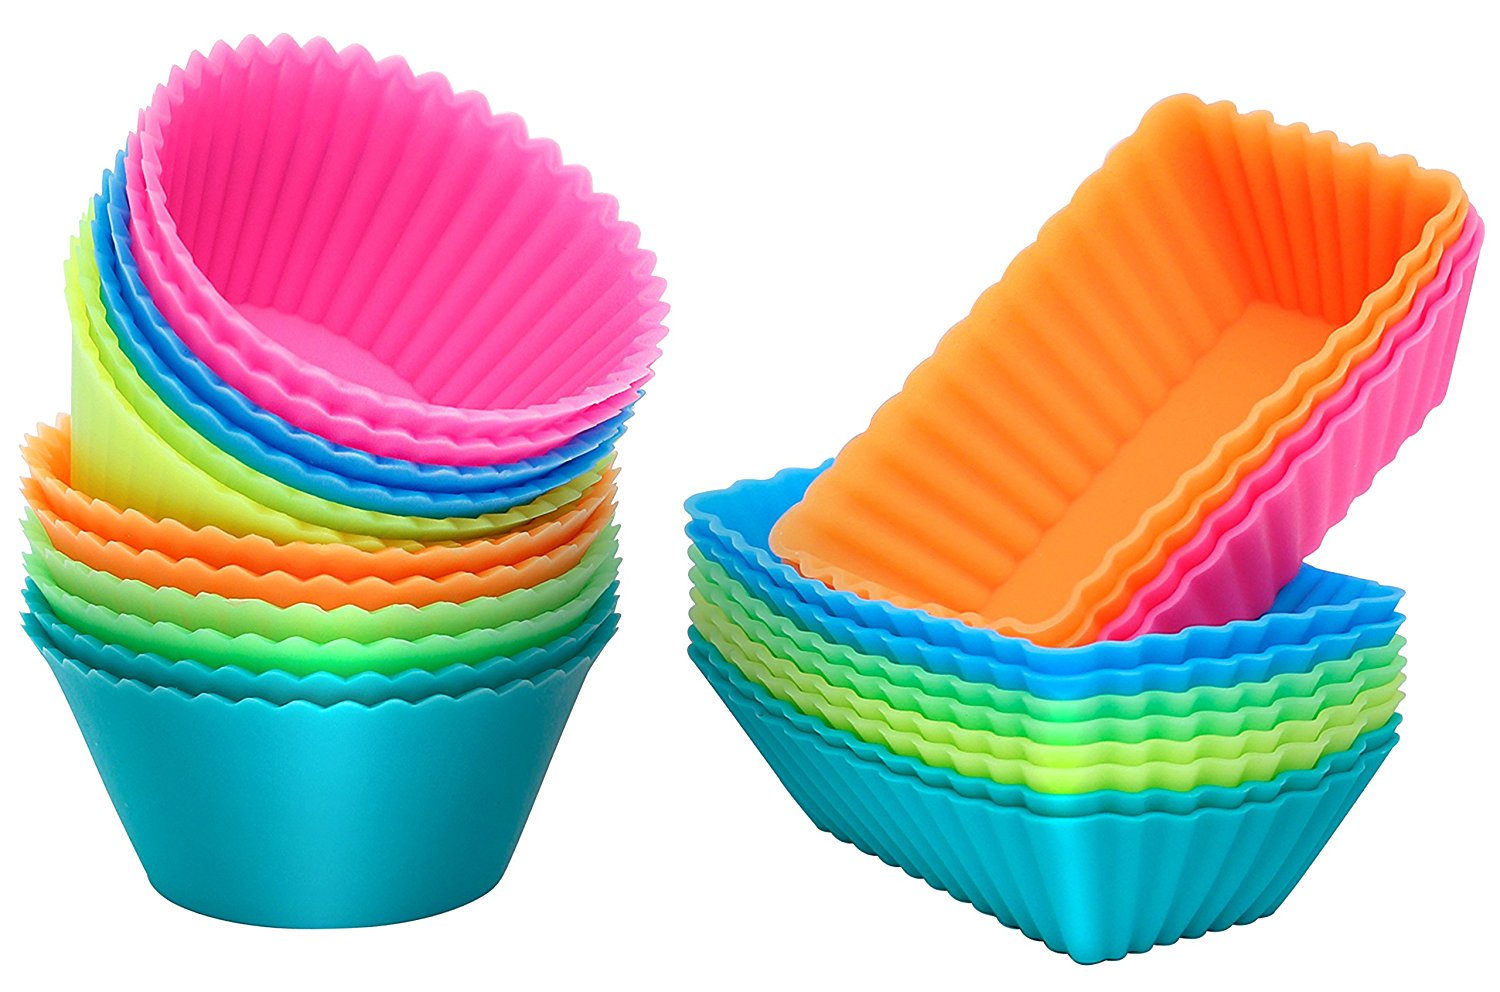 Assorted Colors Silicon Bakeware Mini Cupcake Mold Holders Liners Baking Supplies Set 12 Pieces Cups Container for Muffin Cake Liner by Chuzy Chef Silicone Cupcake Baking Cups Molds